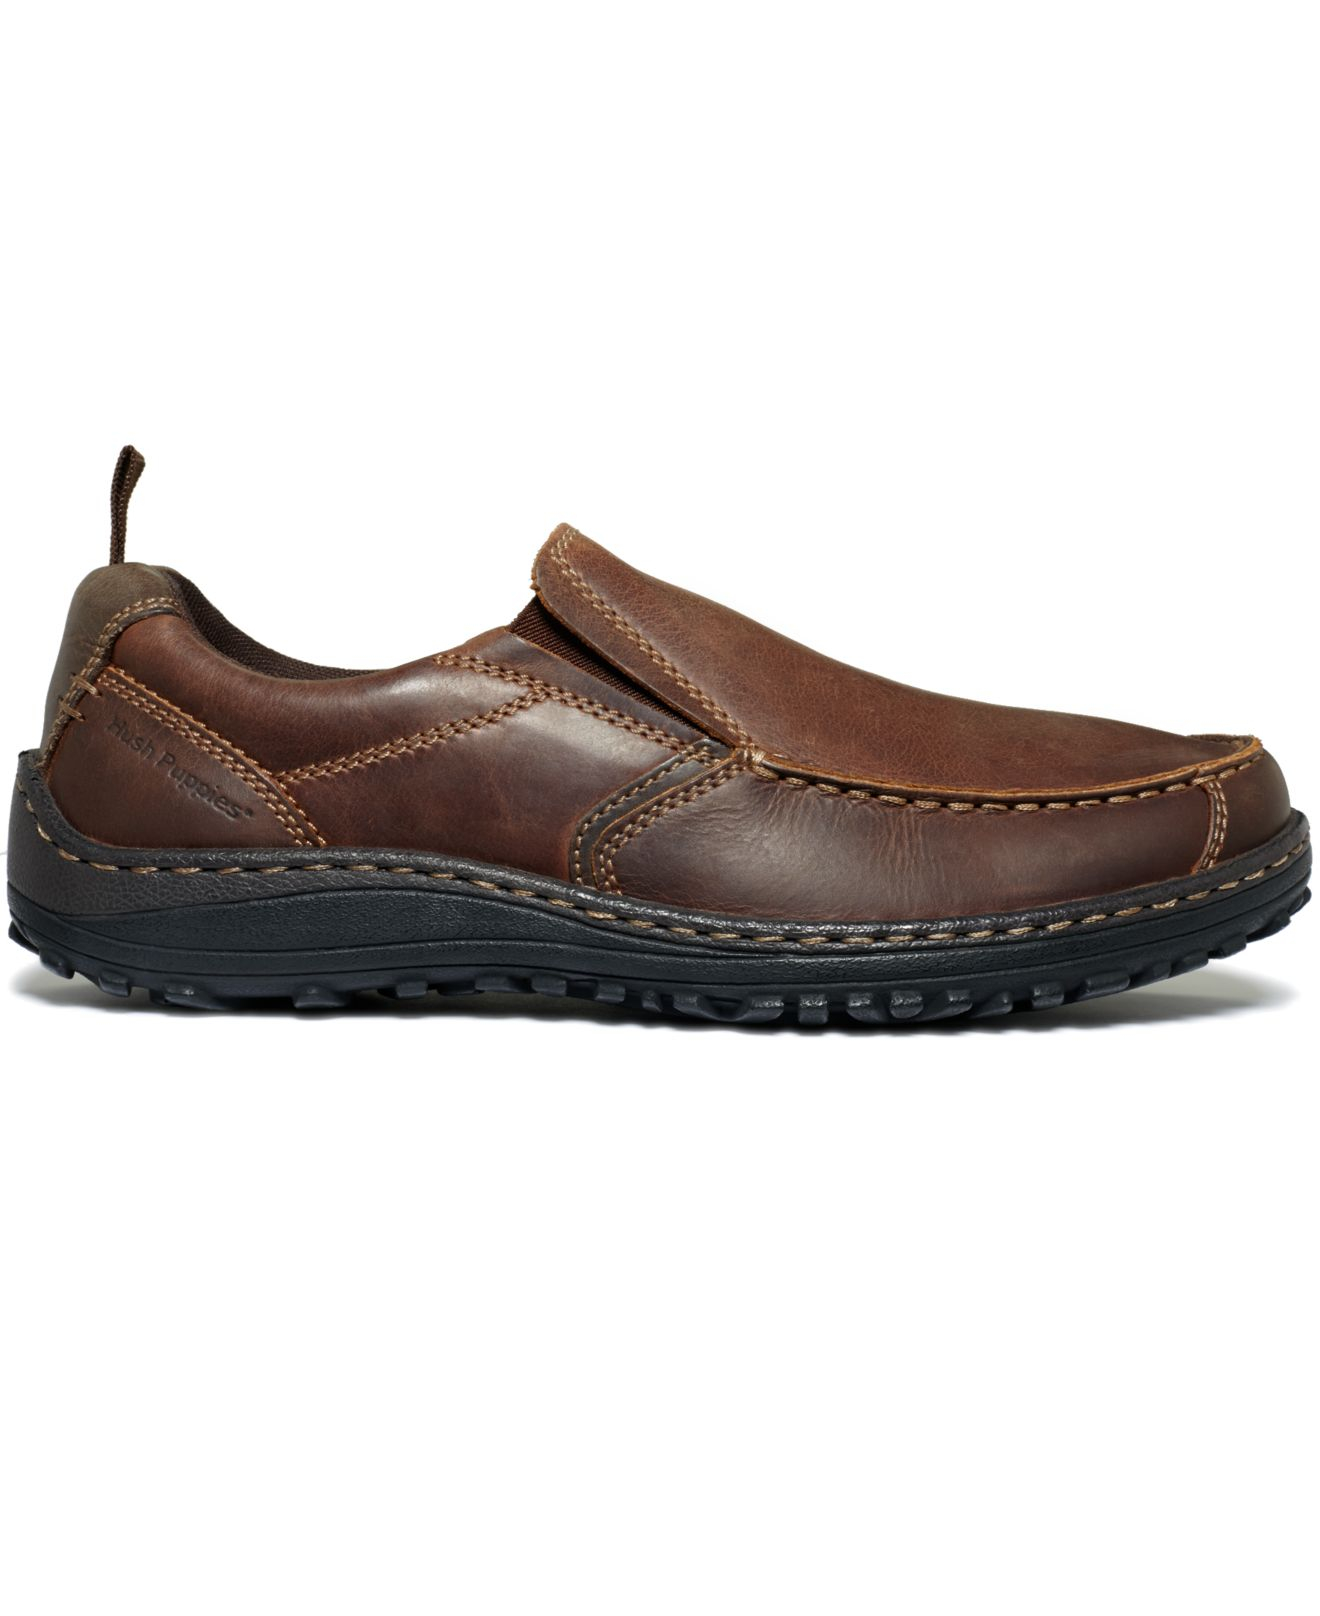 Hush Puppies Belfast Moctoe Loafers in Brown for Men - Lyst